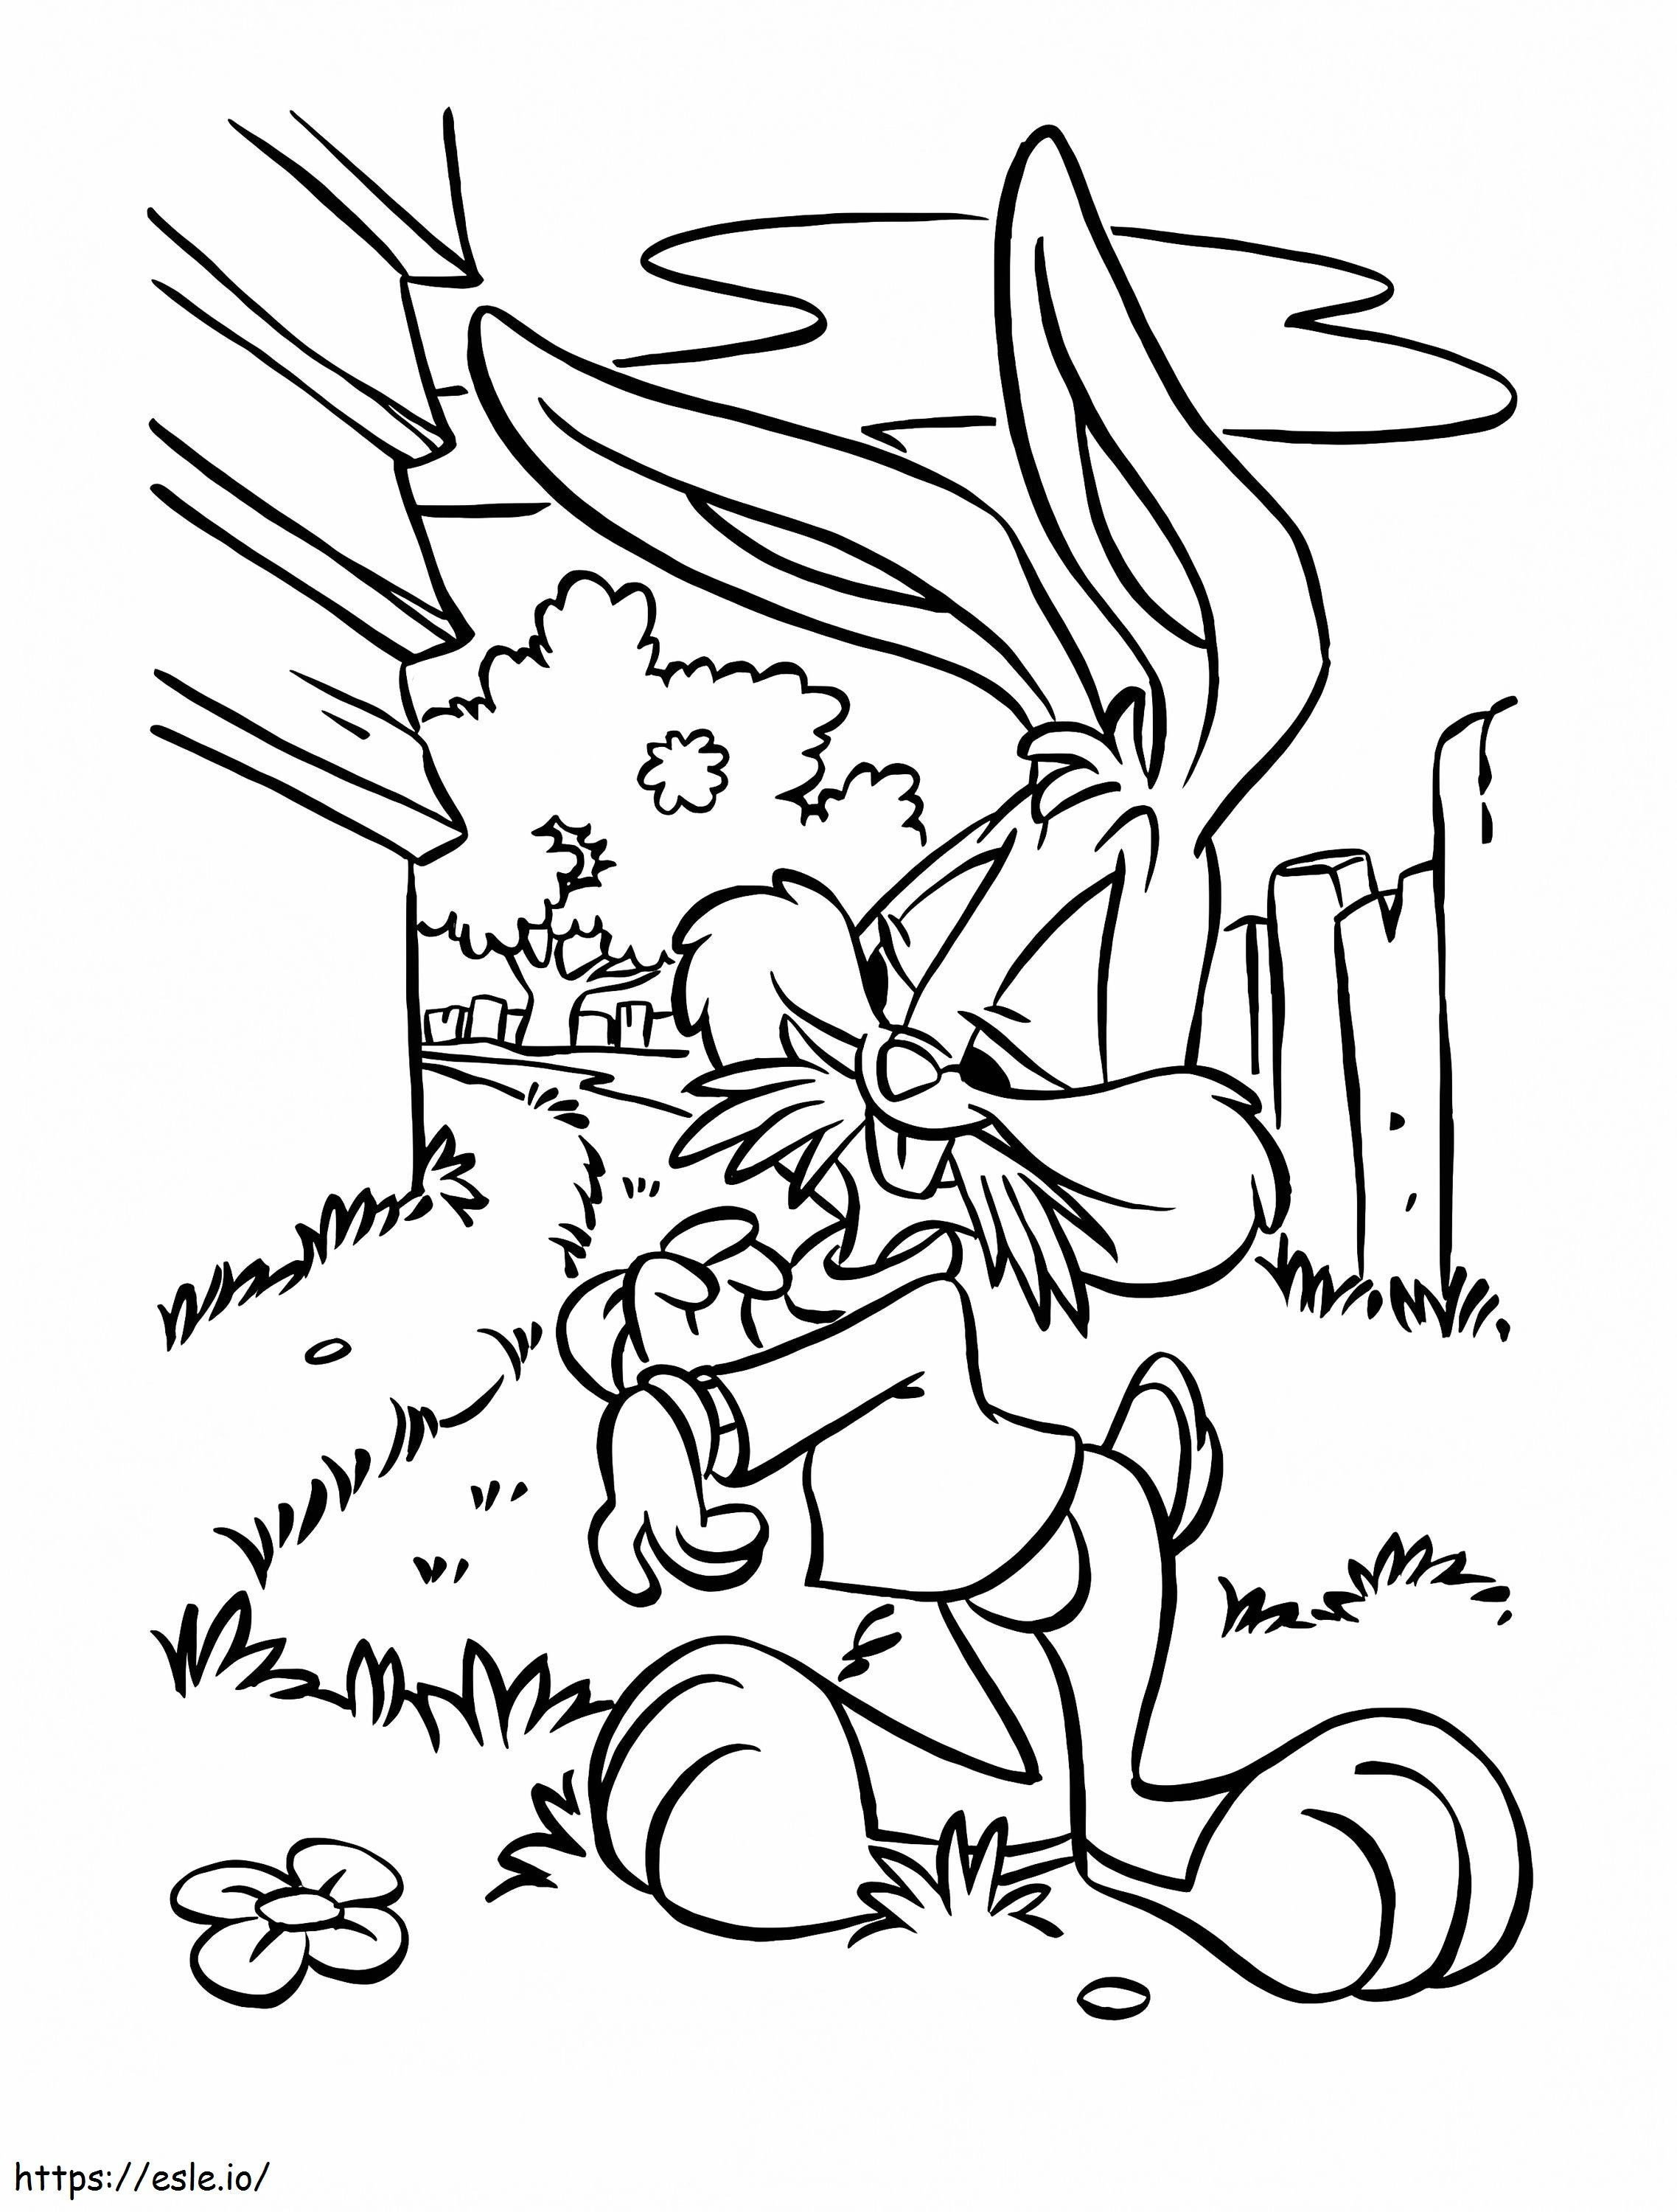 Printable Buster Bunny coloring page